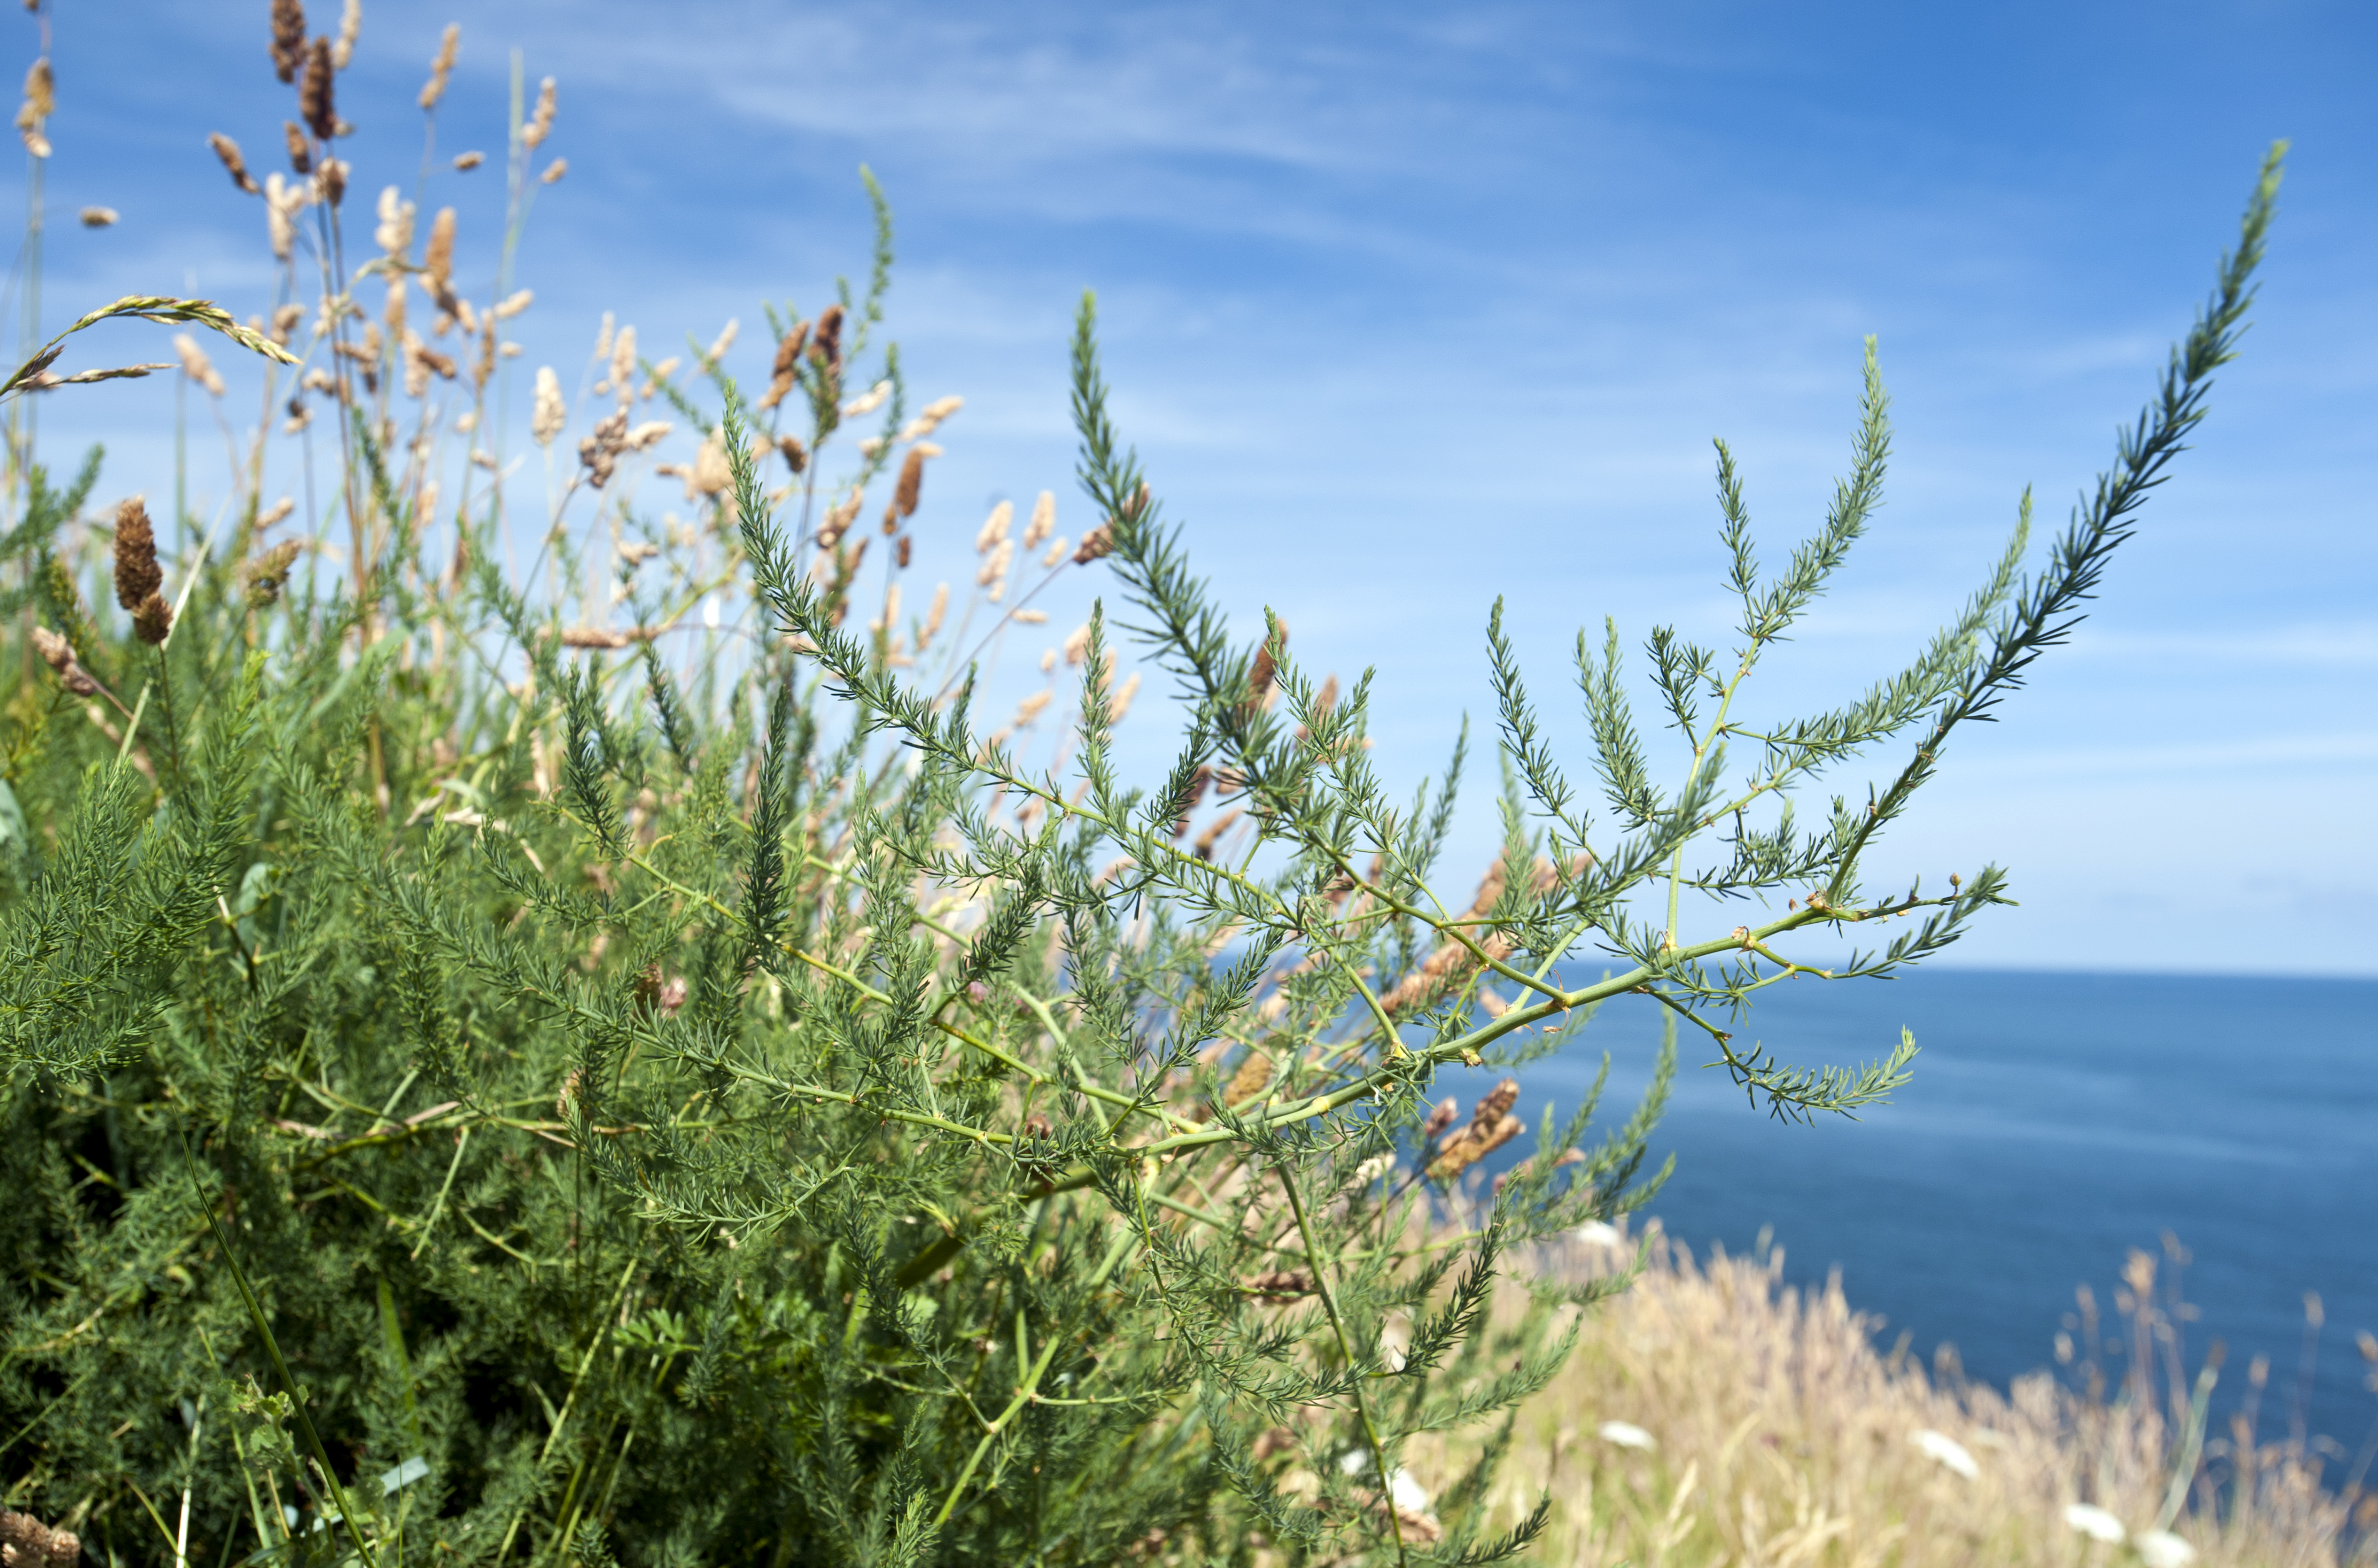 Wild asparagus with the sea in the background